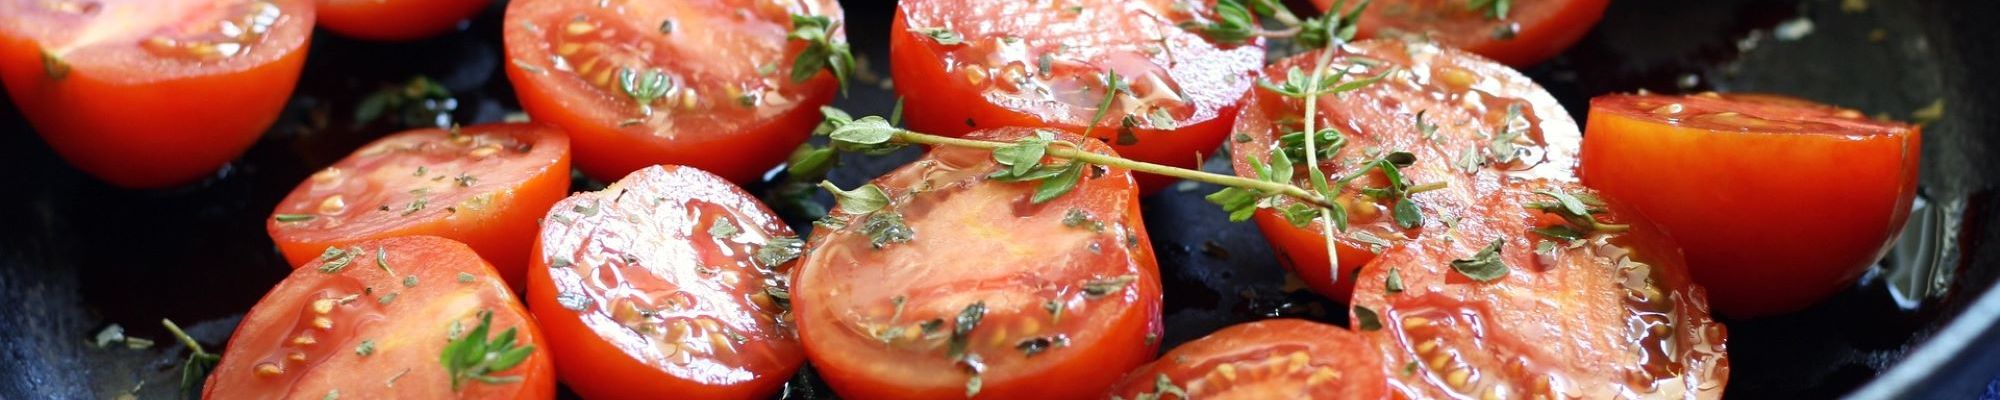 Tomatoes with herbs